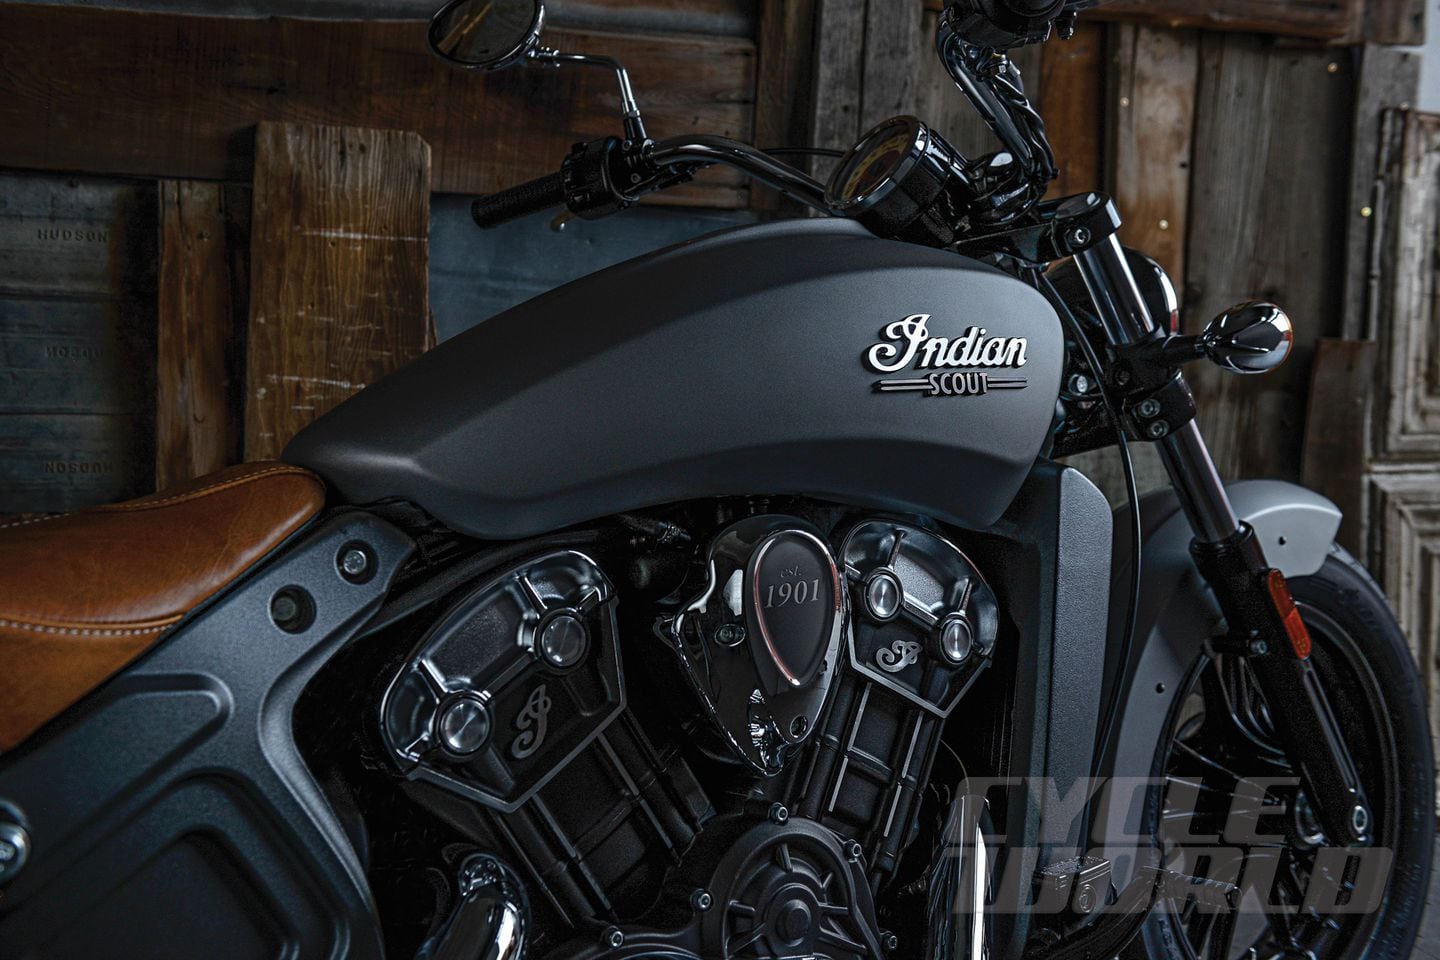 2015 Indian Scout Cruiser Motorcycle Review & Road Test- Photos